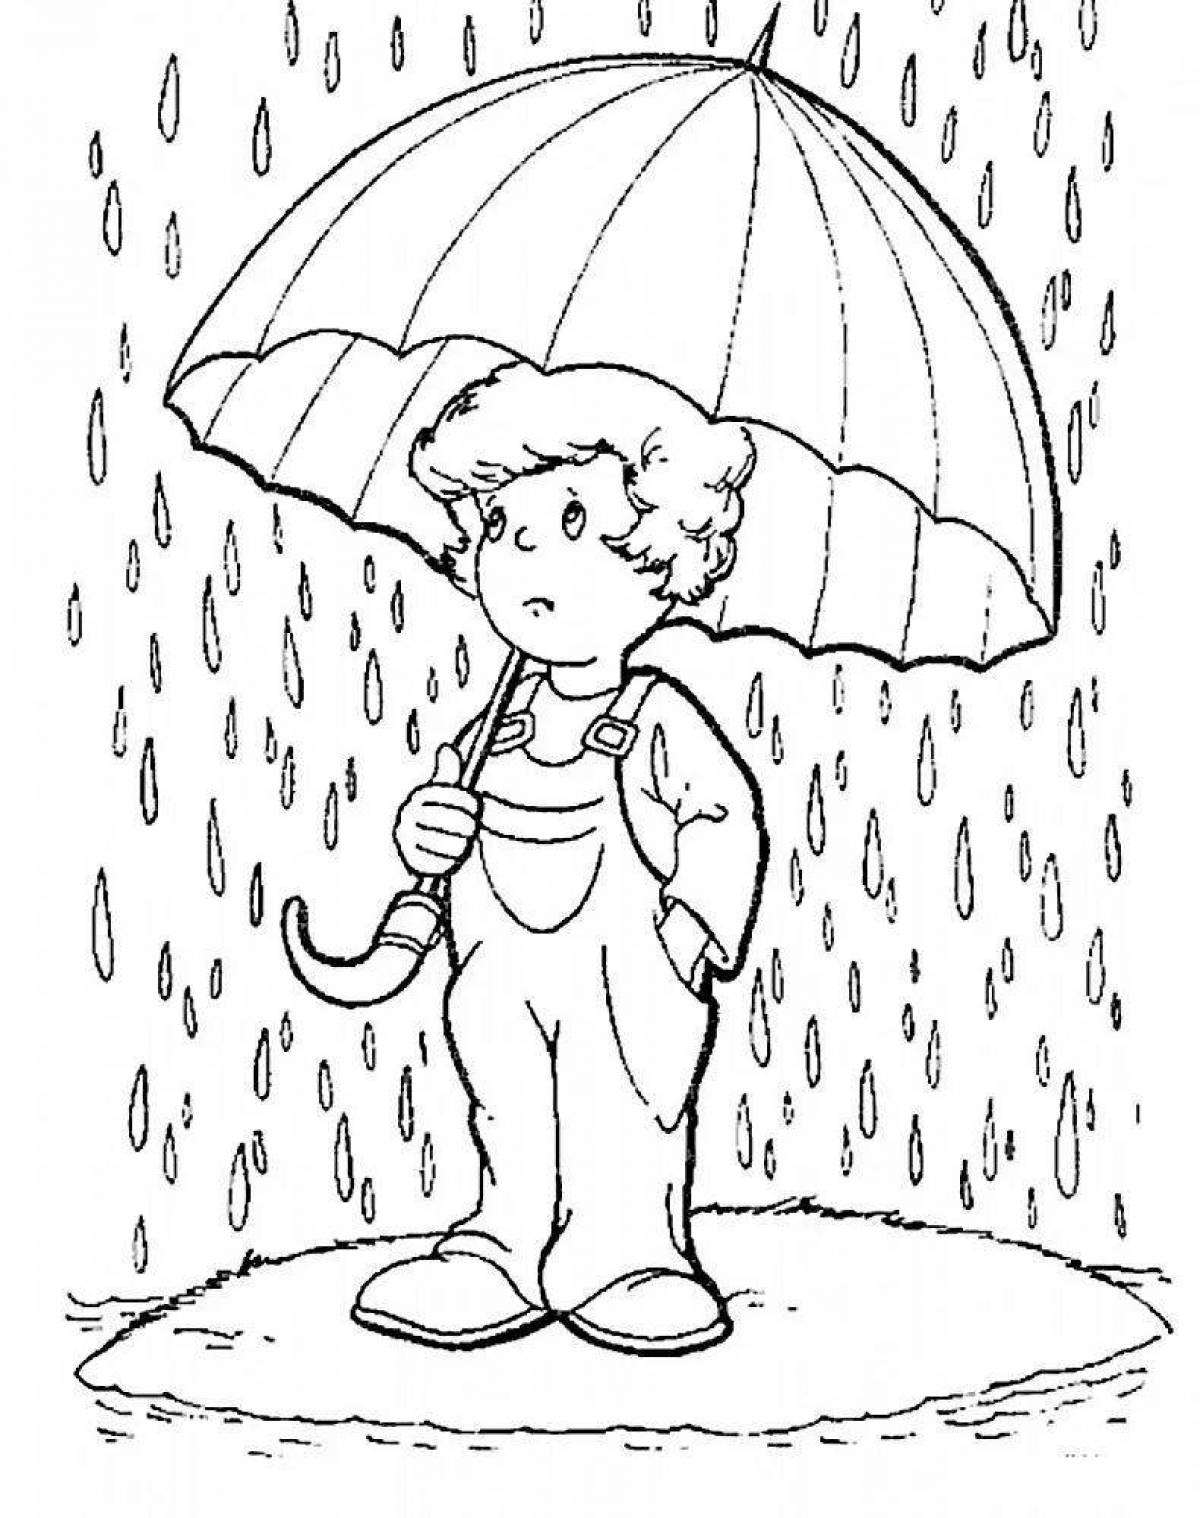 Gorgeous Spring Rain coloring page